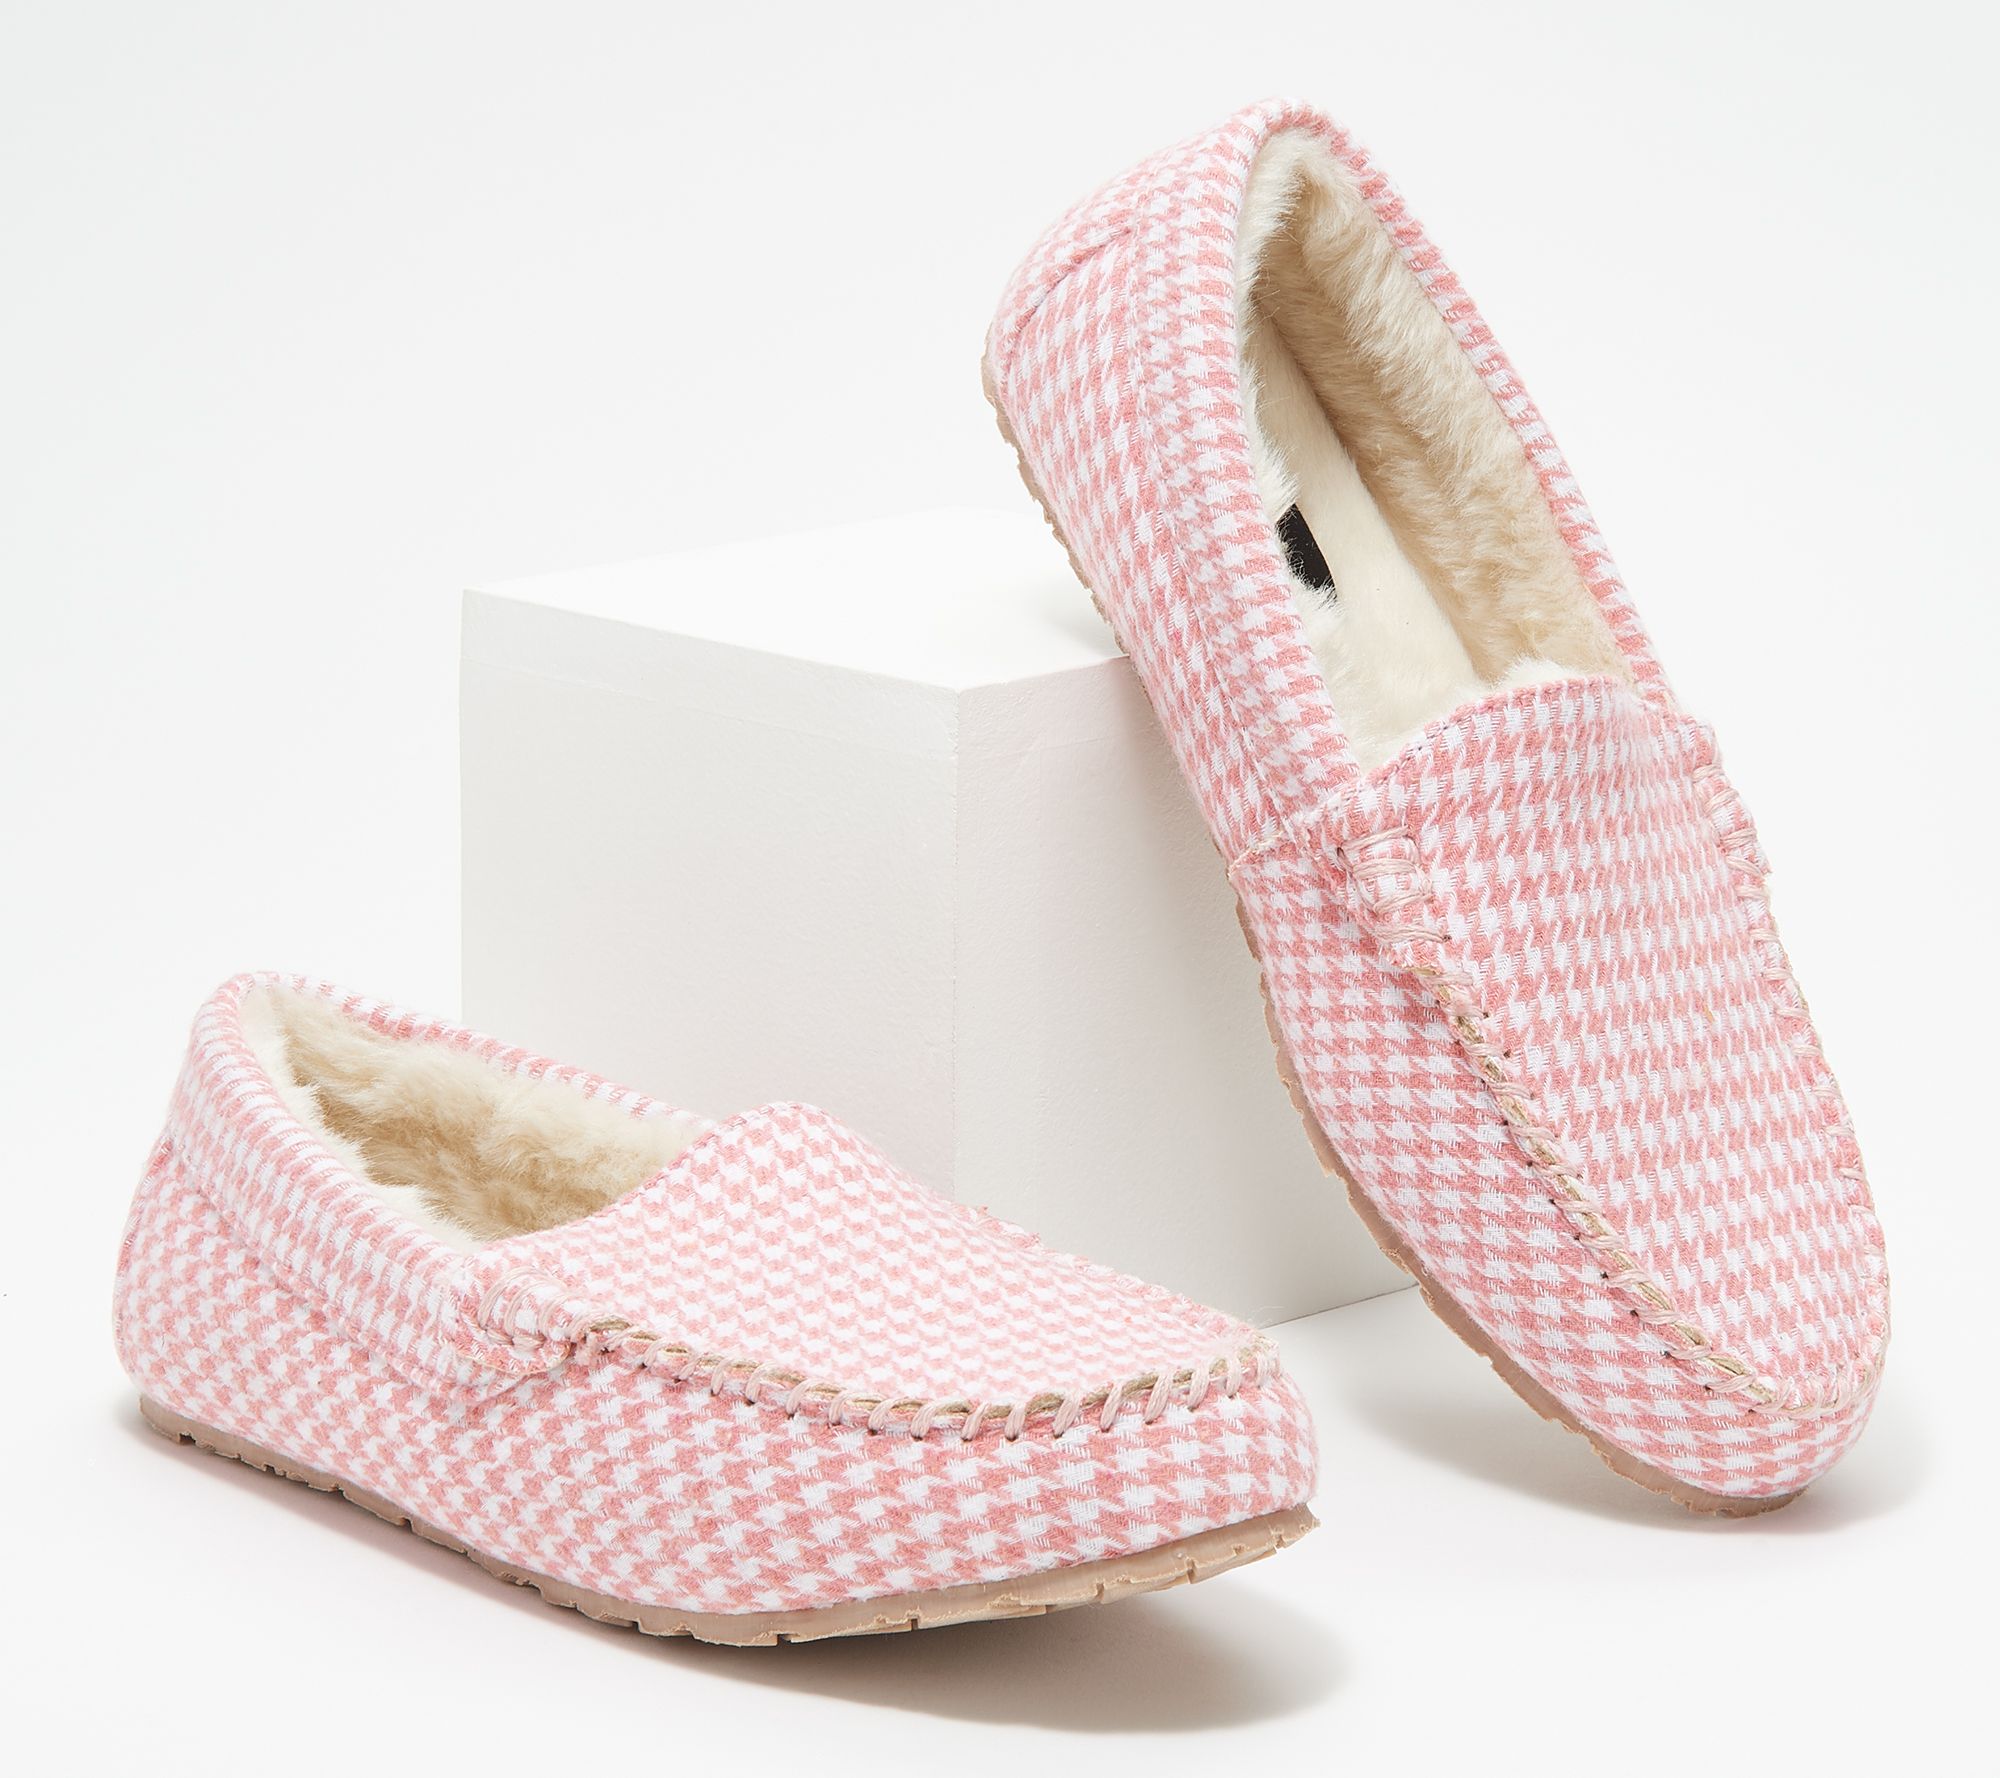 clarks slippers qvc